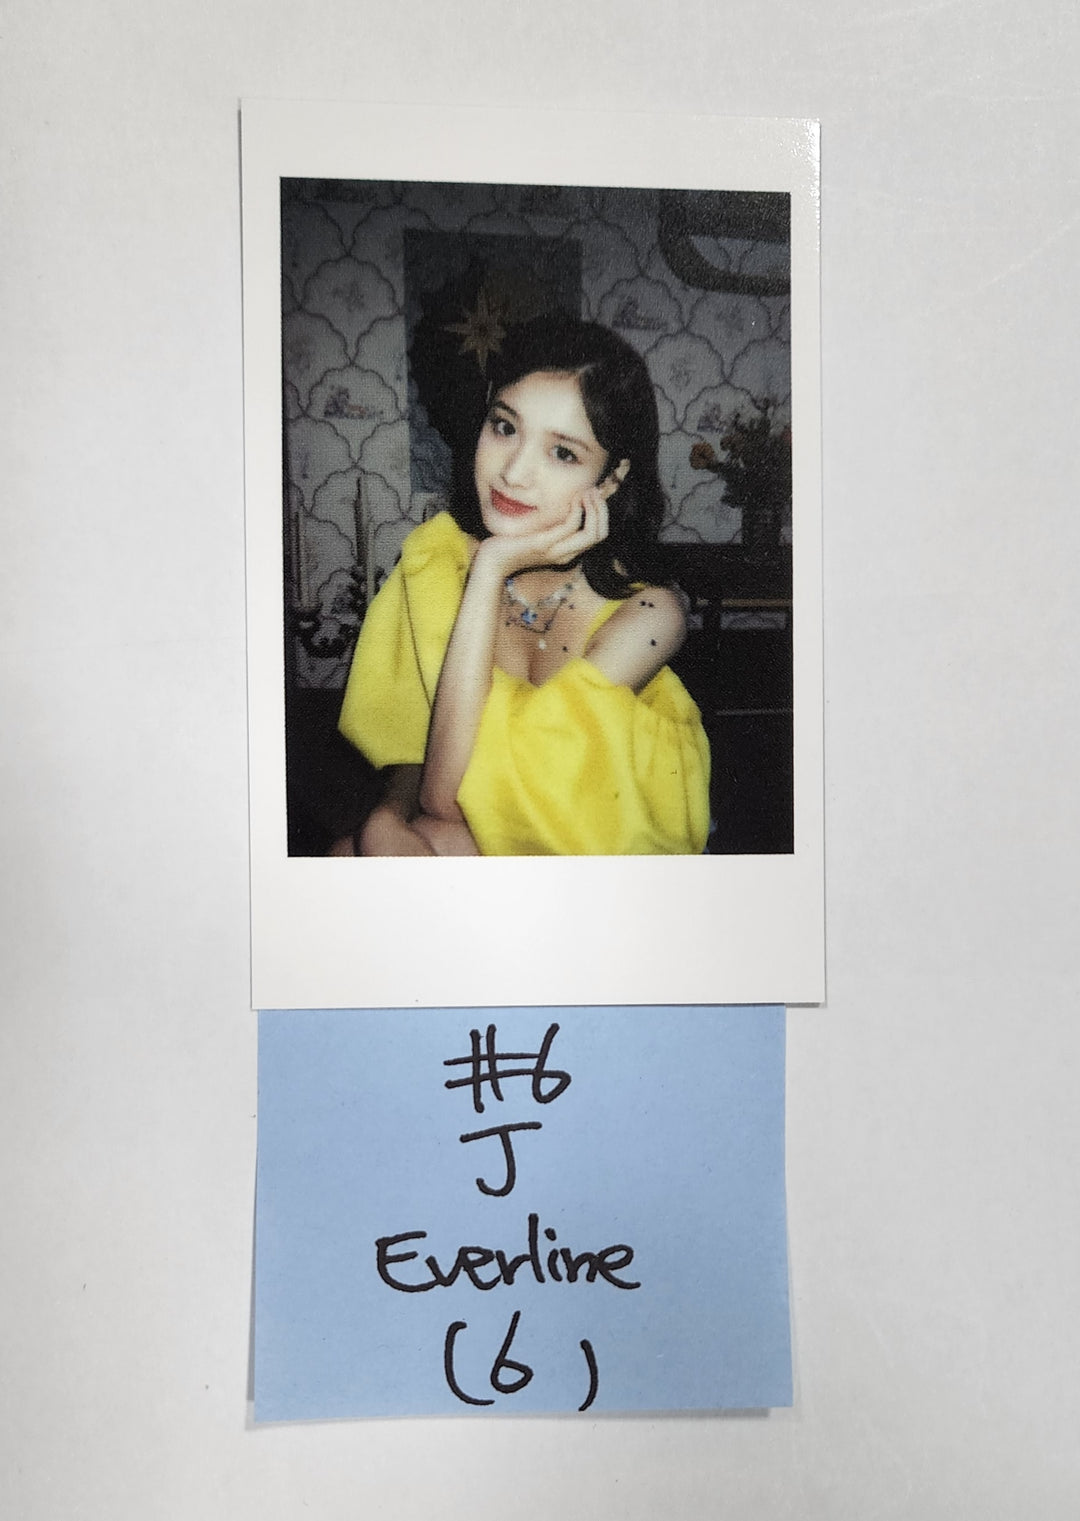 StayC 'WE NEED LOVE' - Everline Fansign Event Polaroid Type Photocard